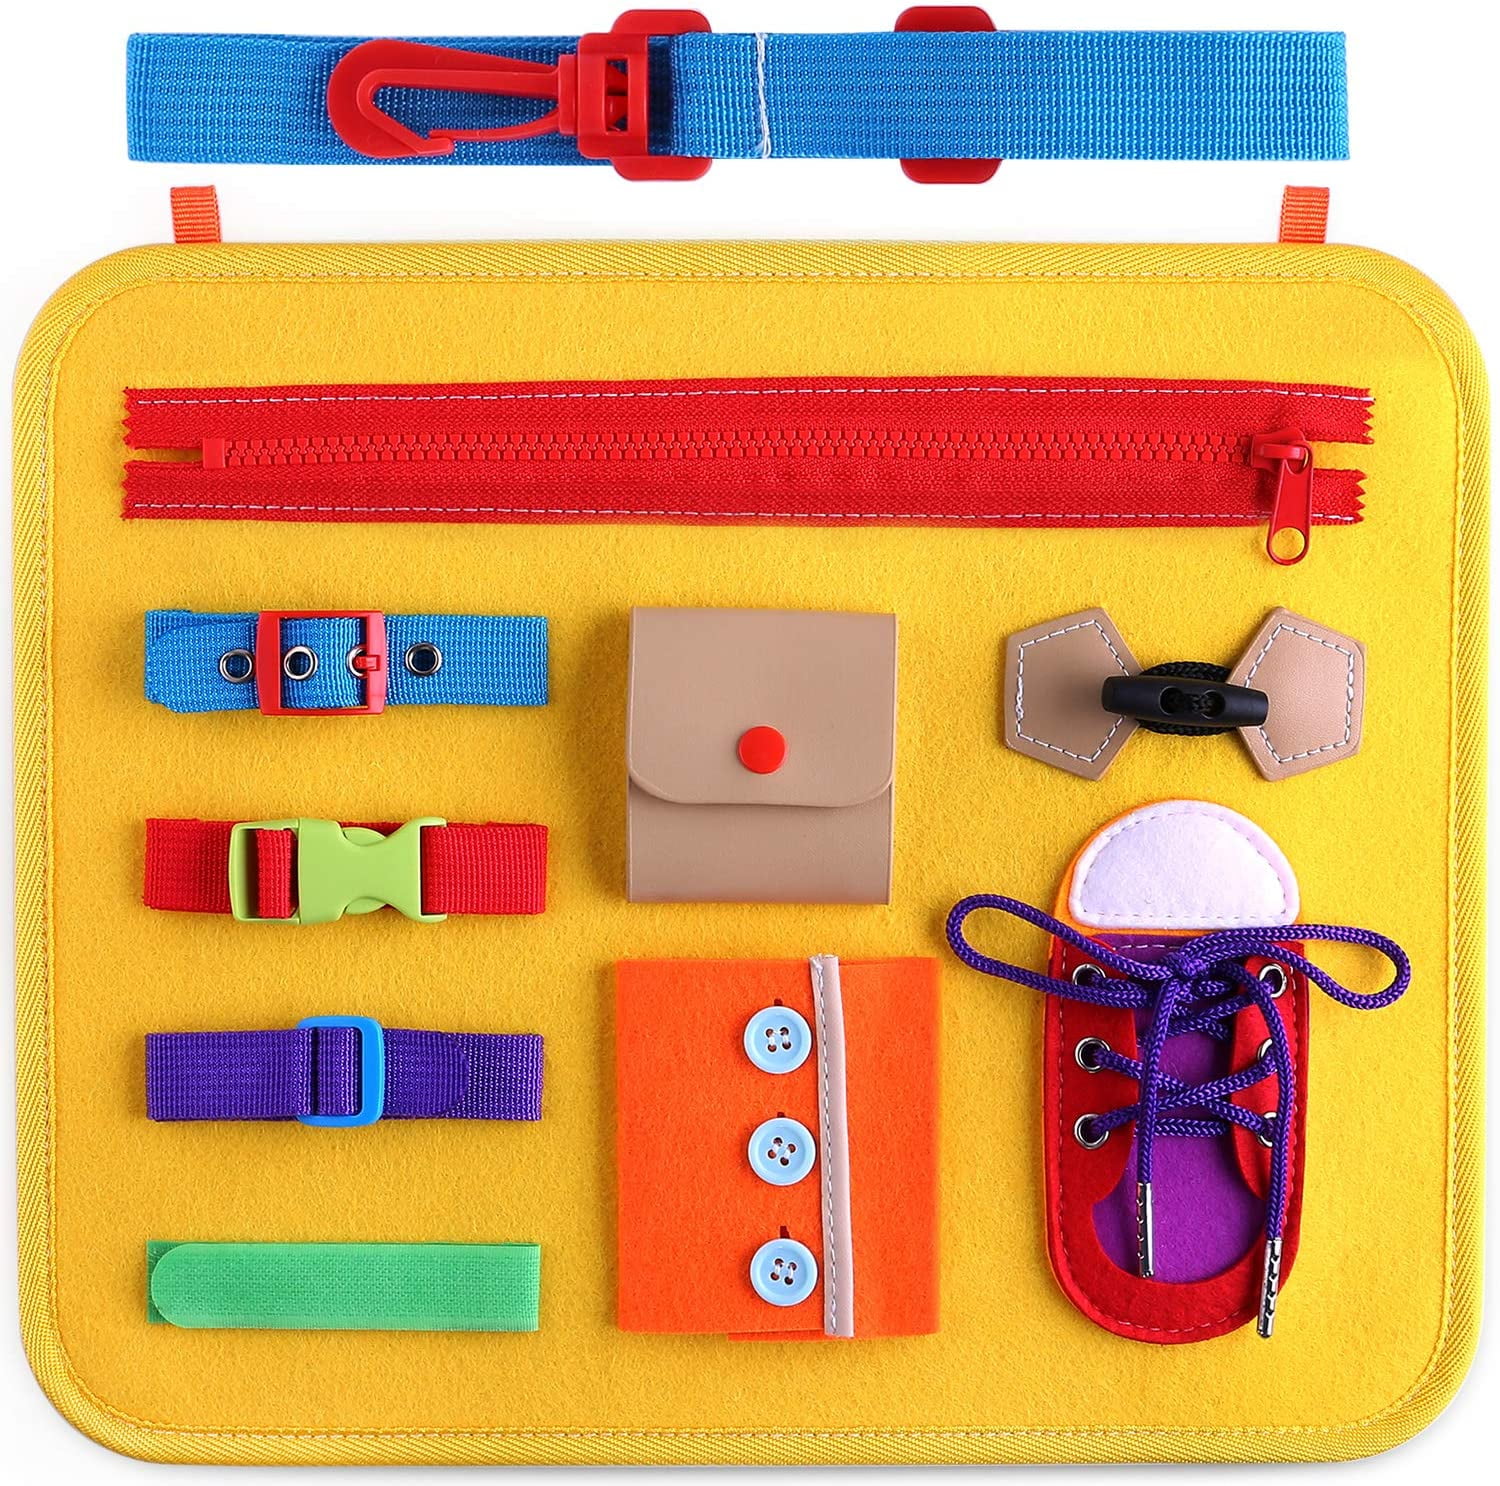 Toddler Kids Busy Board Basic Skills Educational Learning Toys 